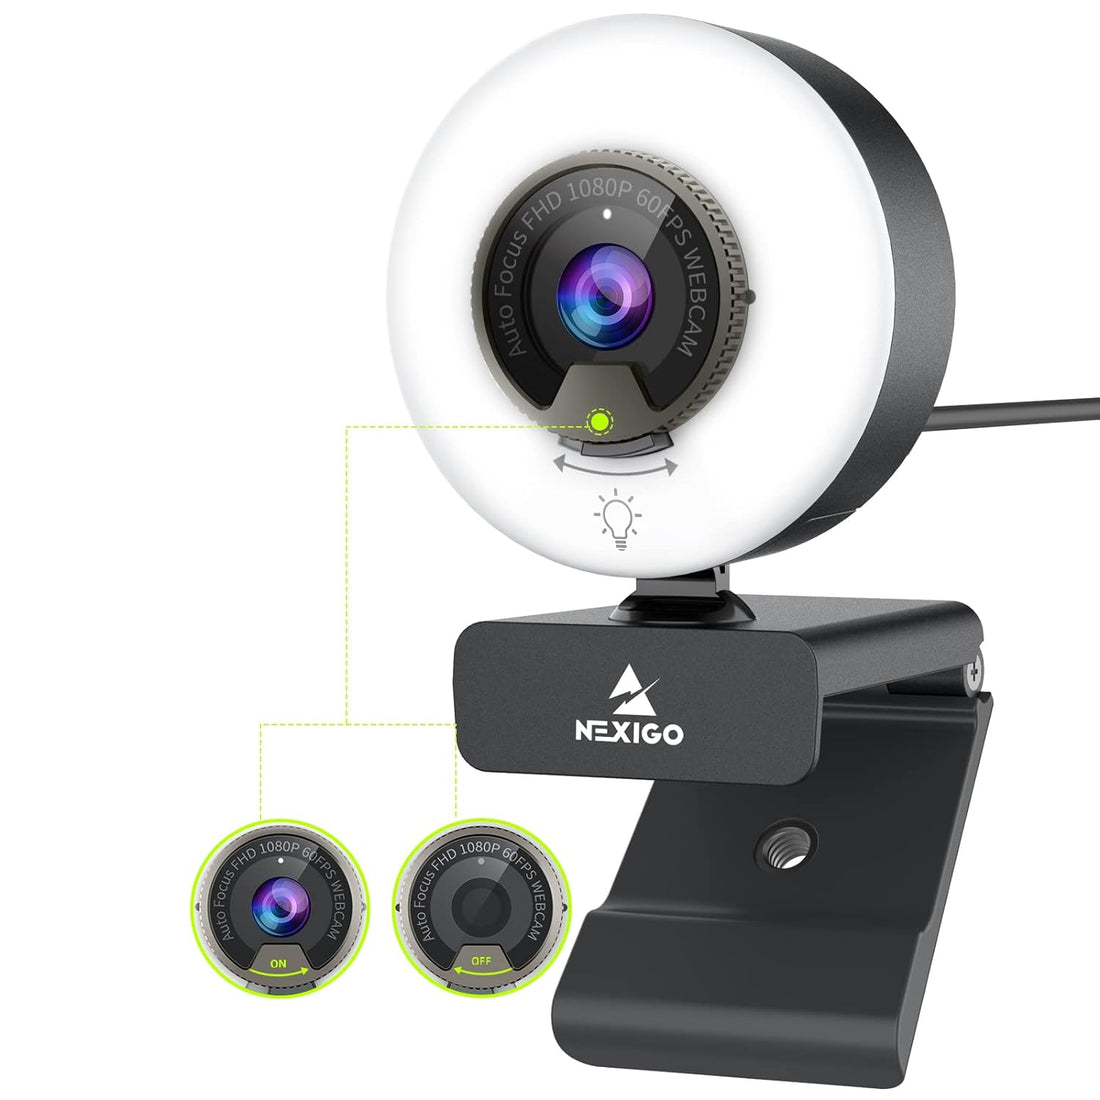 60FPS Streaming Webcam with Ring Light, Fast AutoFocus, Built-in Privacy Cover, 2021 NexiGo N960E USB 1080P Web Camera, Dual Stereo Microphone, for Zoom Meeting Skype Teams Twitch